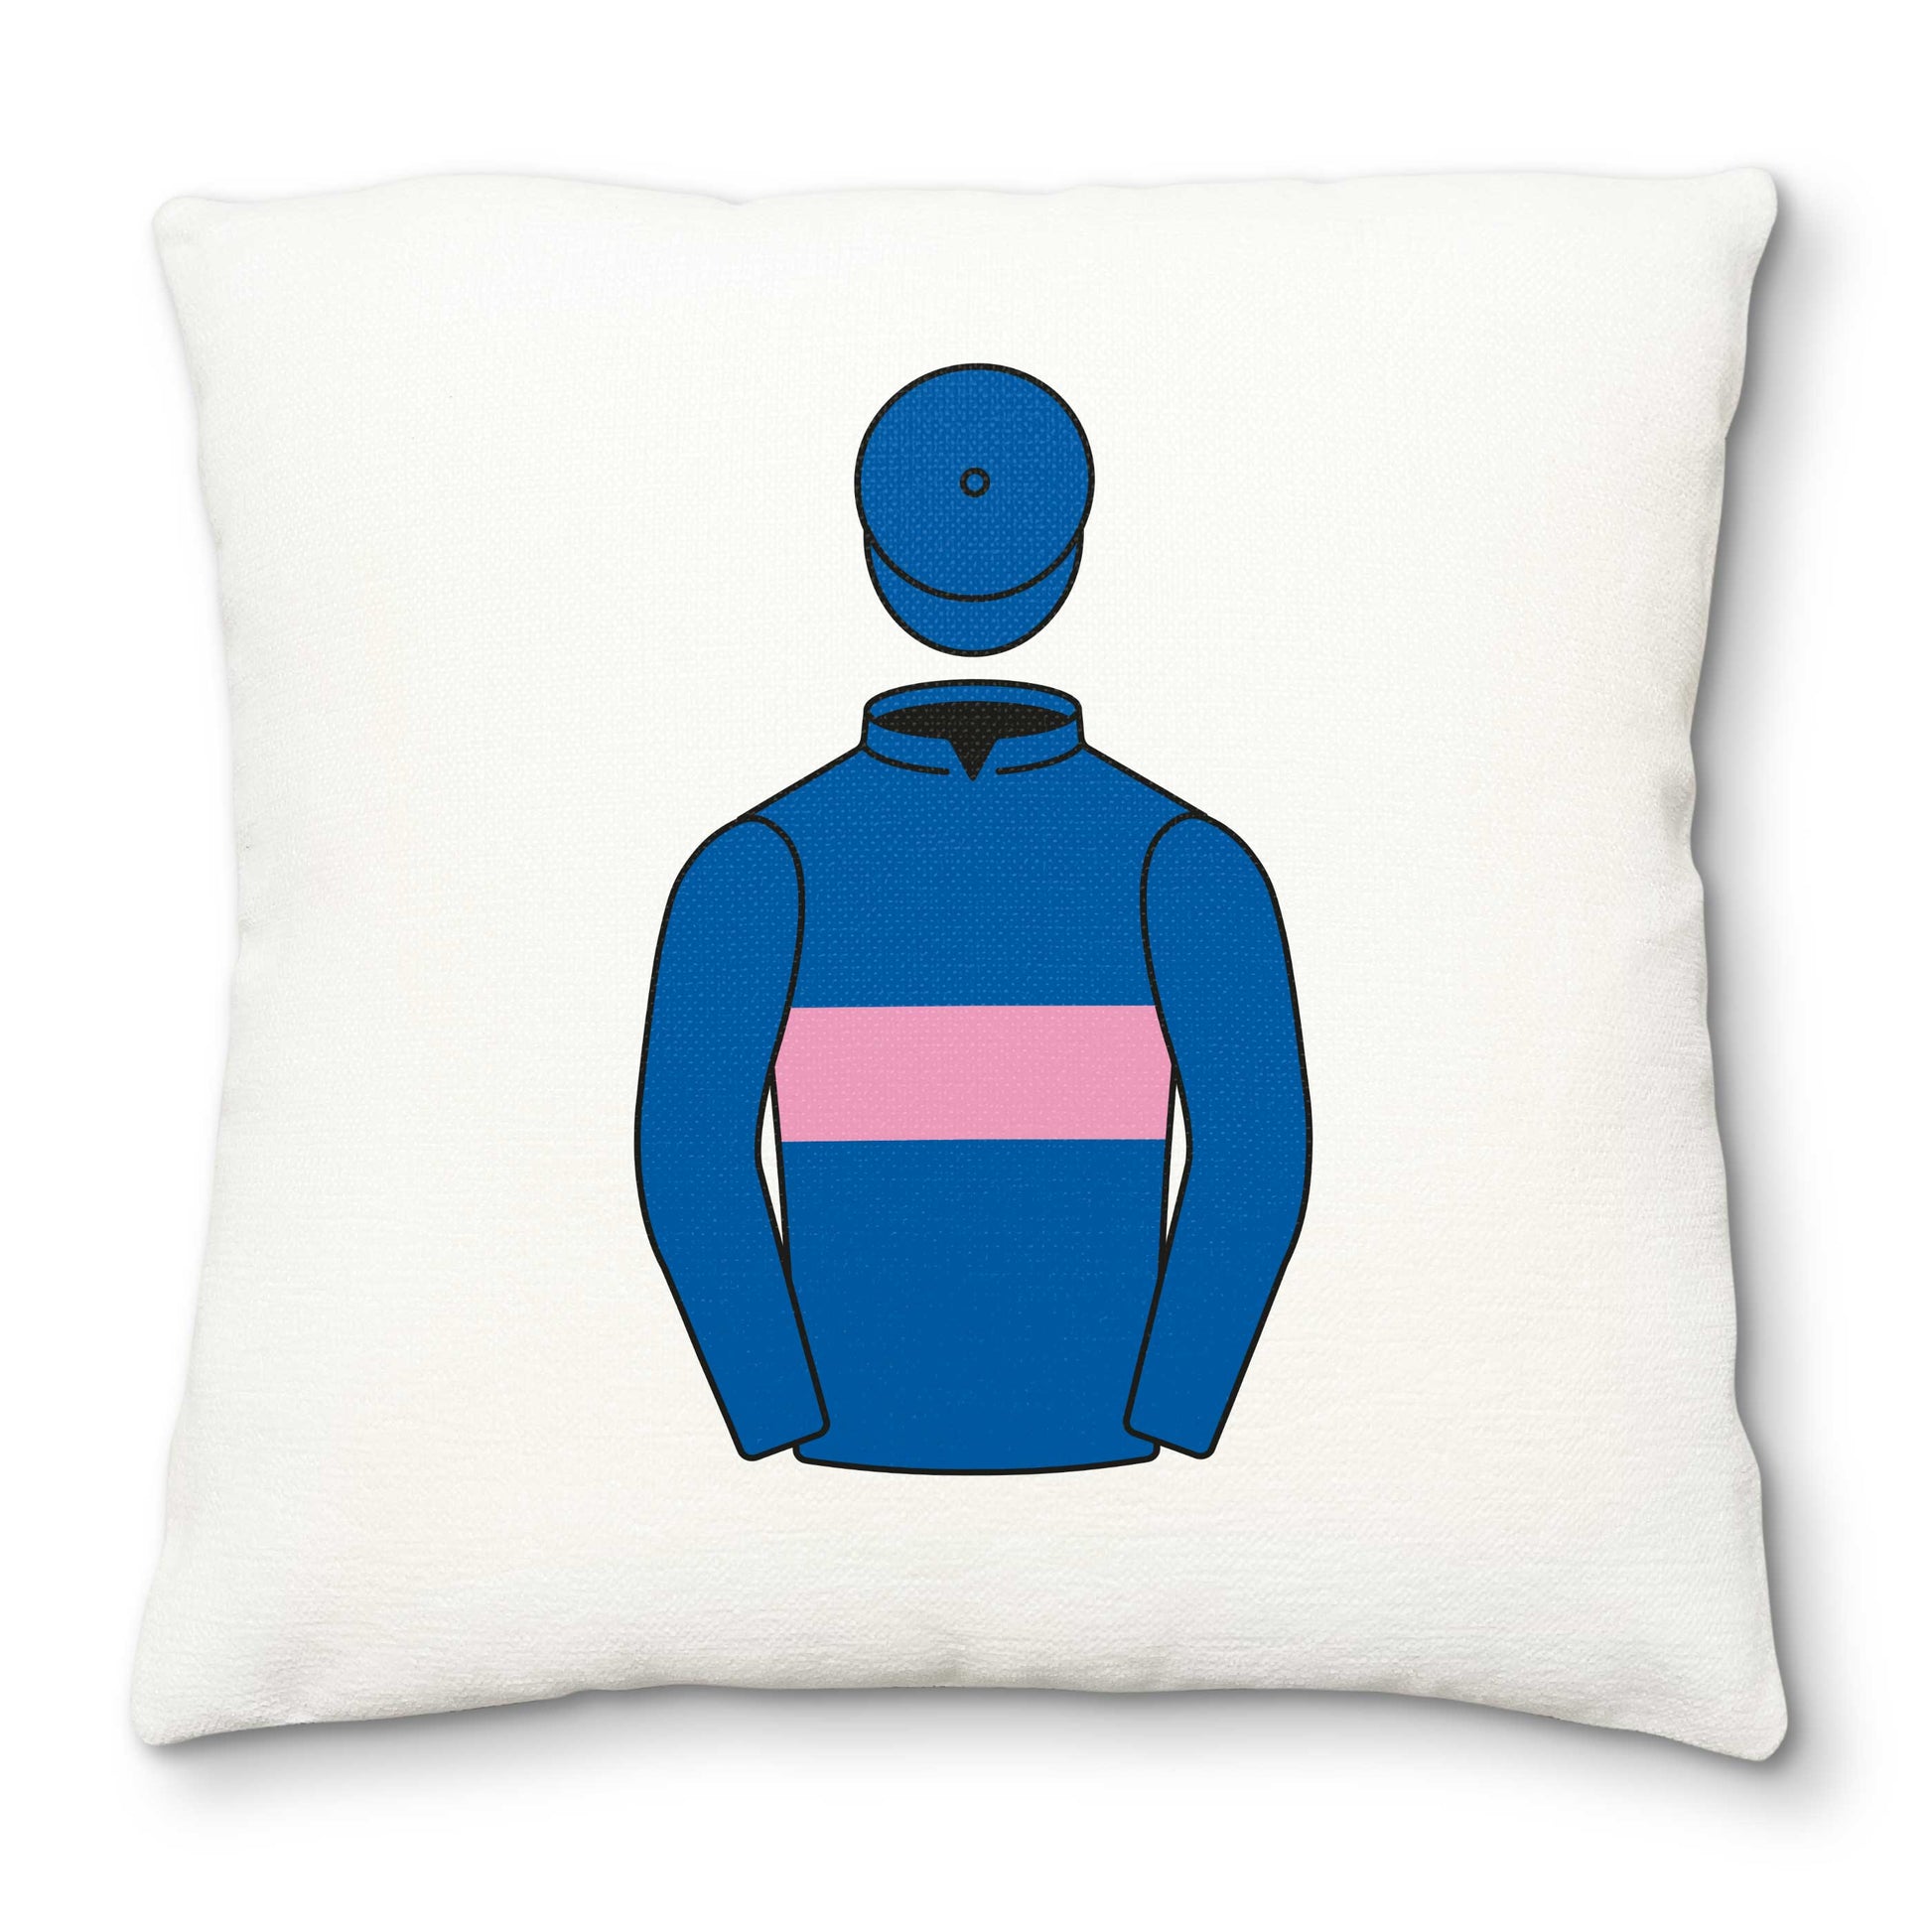 Mr And Mrs William Rucker Deluxe Cushion Cover - Hacked Up